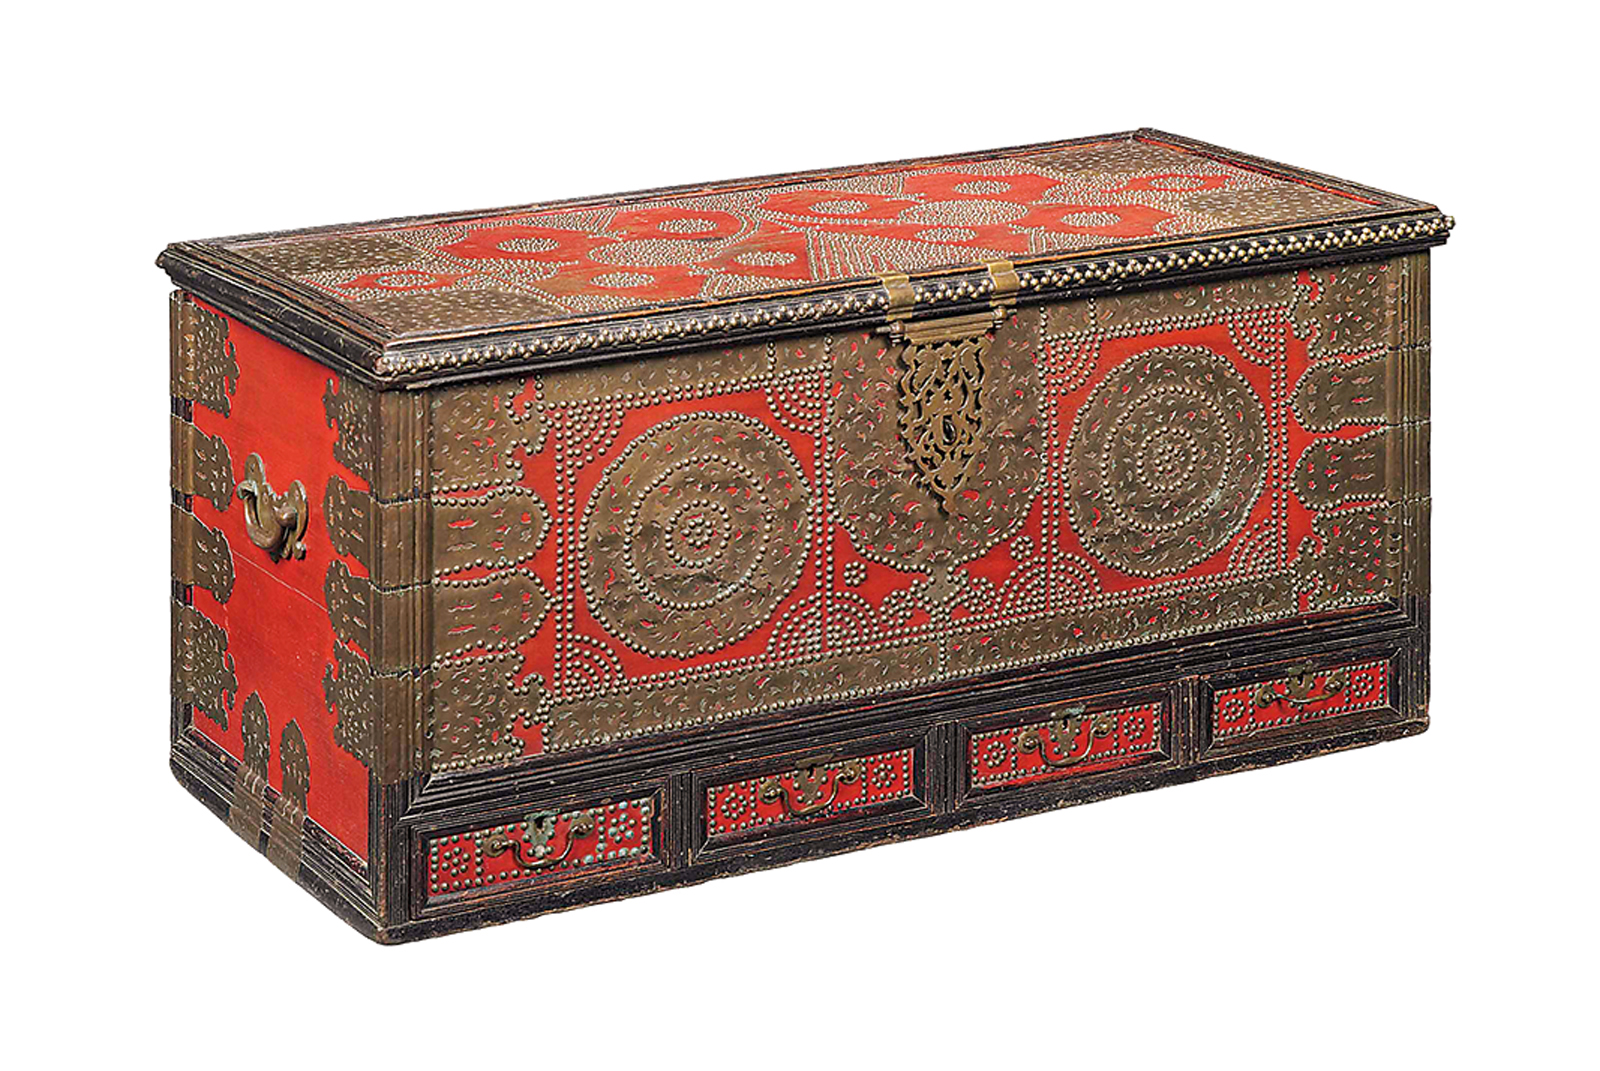 <p>Red paint under brass studs and appliqué plates of this 19th-century “Zanzibar” chest indicates that it likely was used for a dowry.</p>